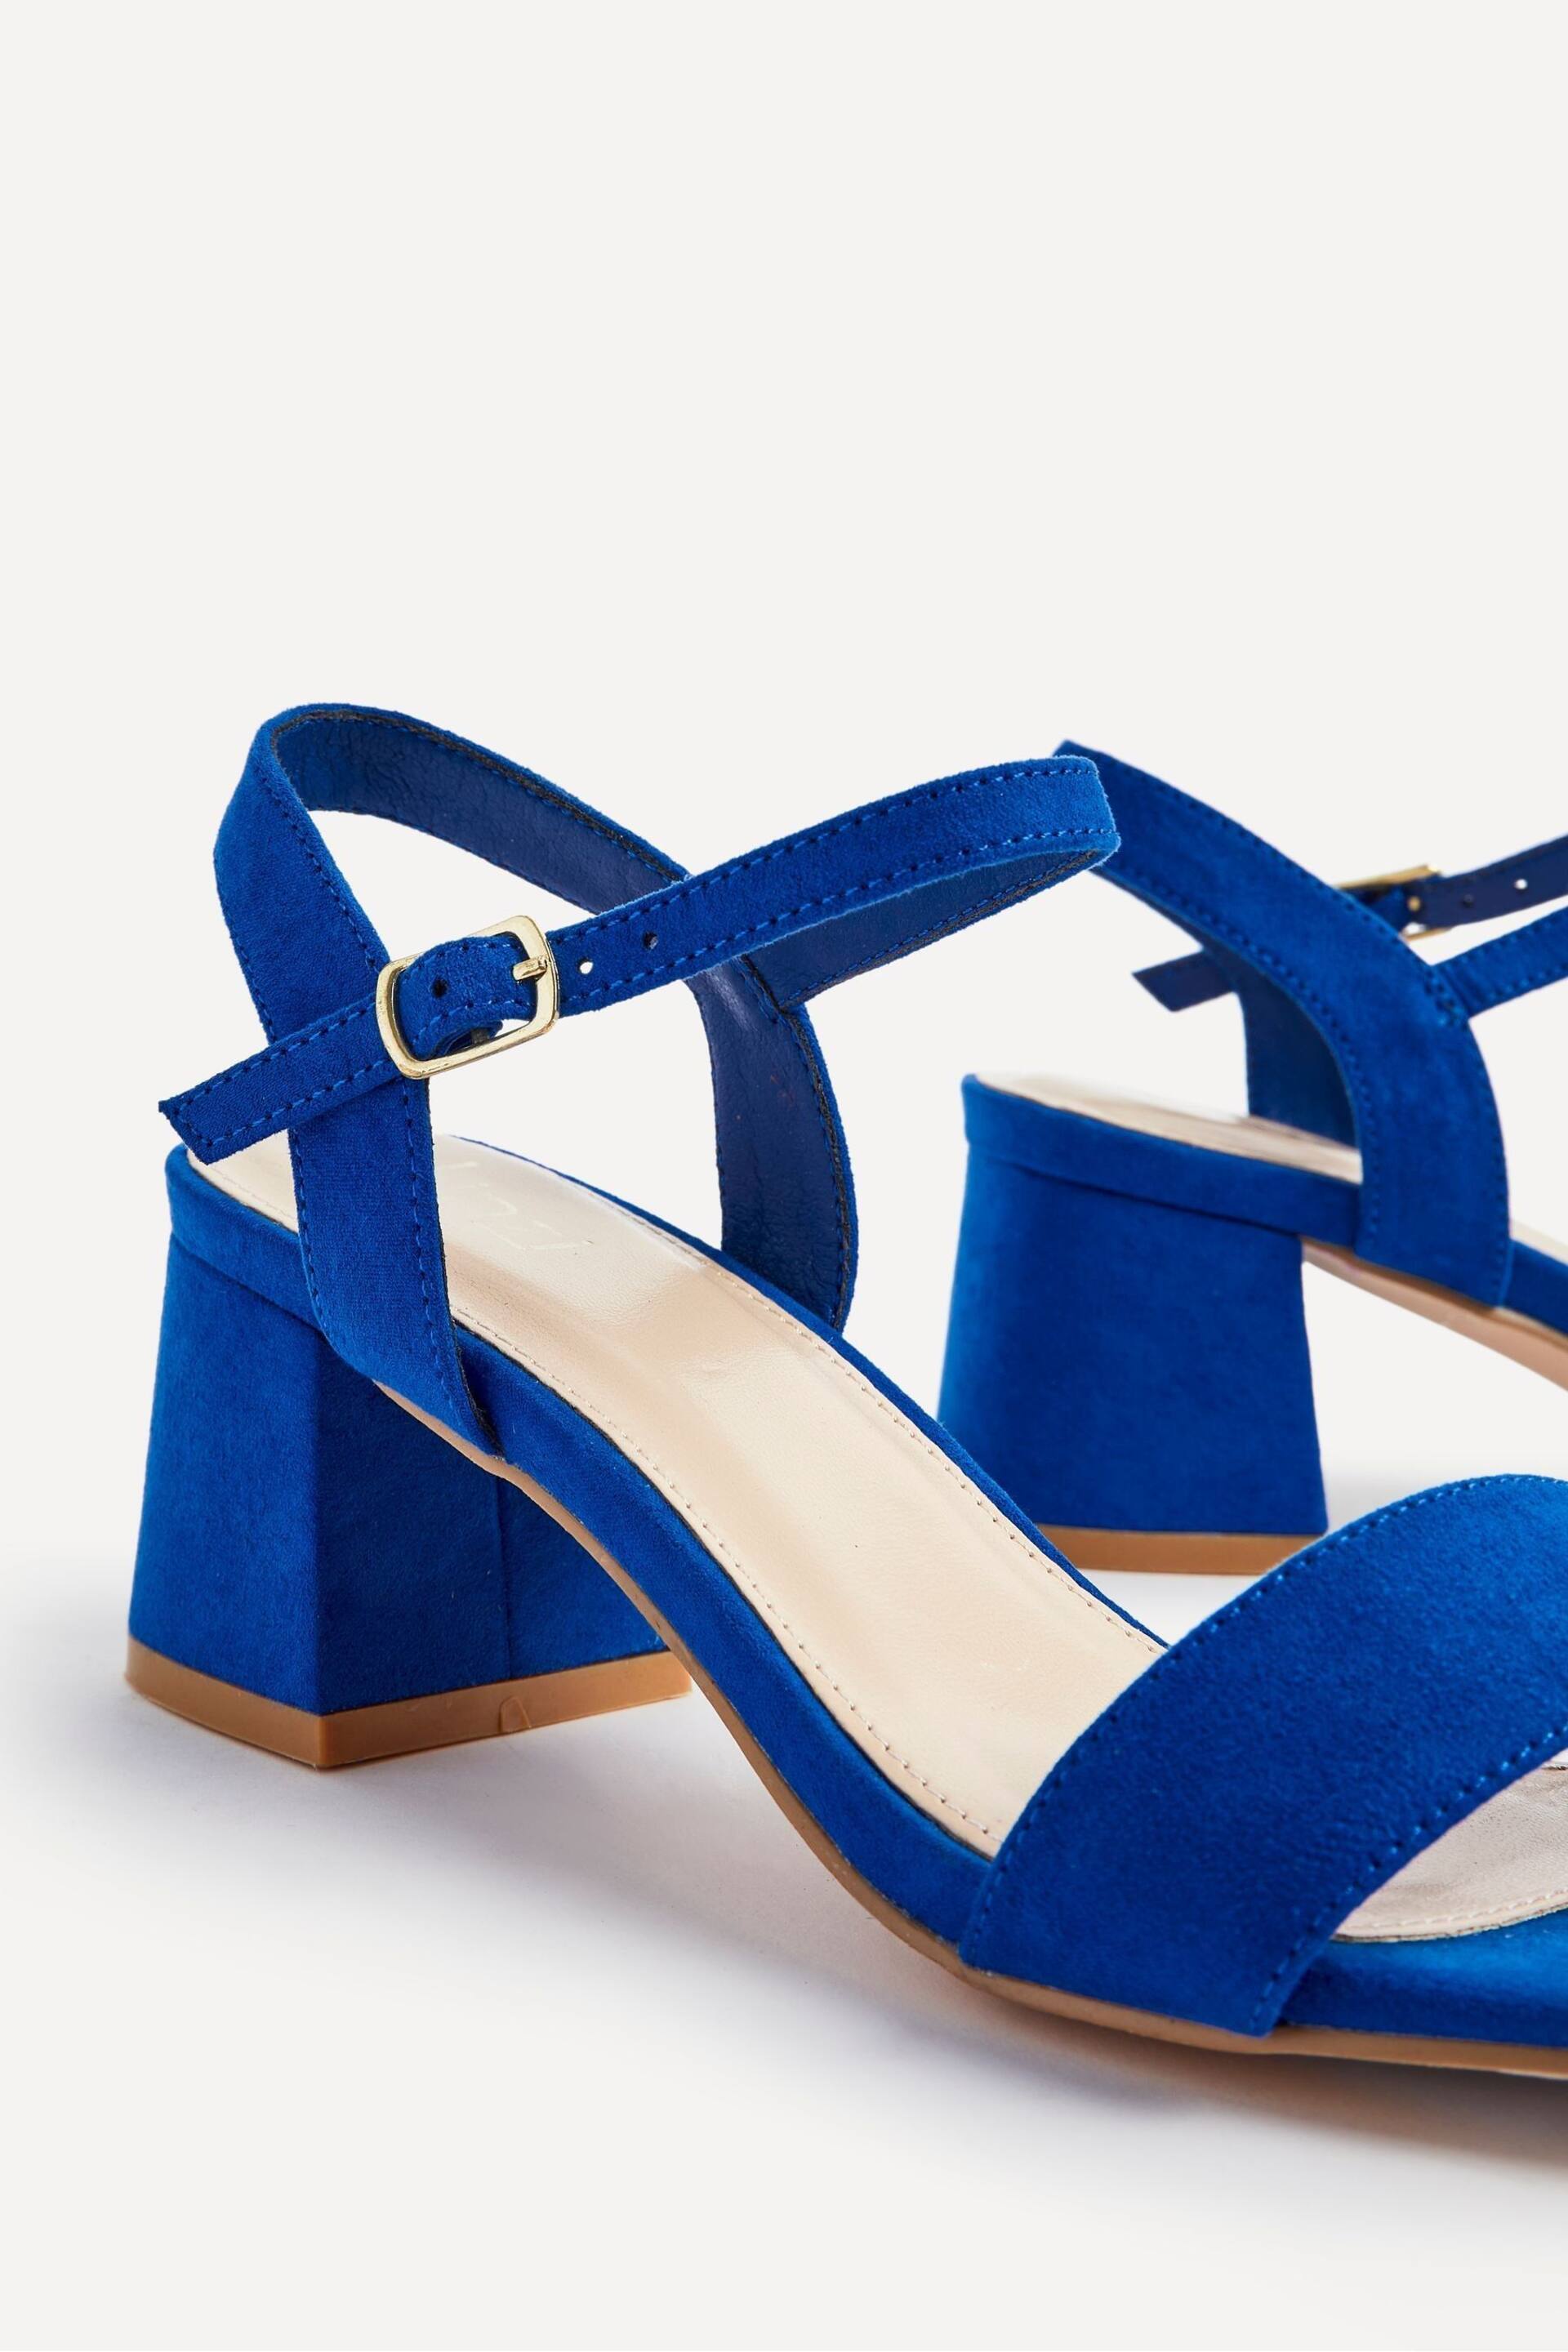 Linzi Cobalt Blue Darcie Barely There Block Heeled Sandals - Image 8 of 9